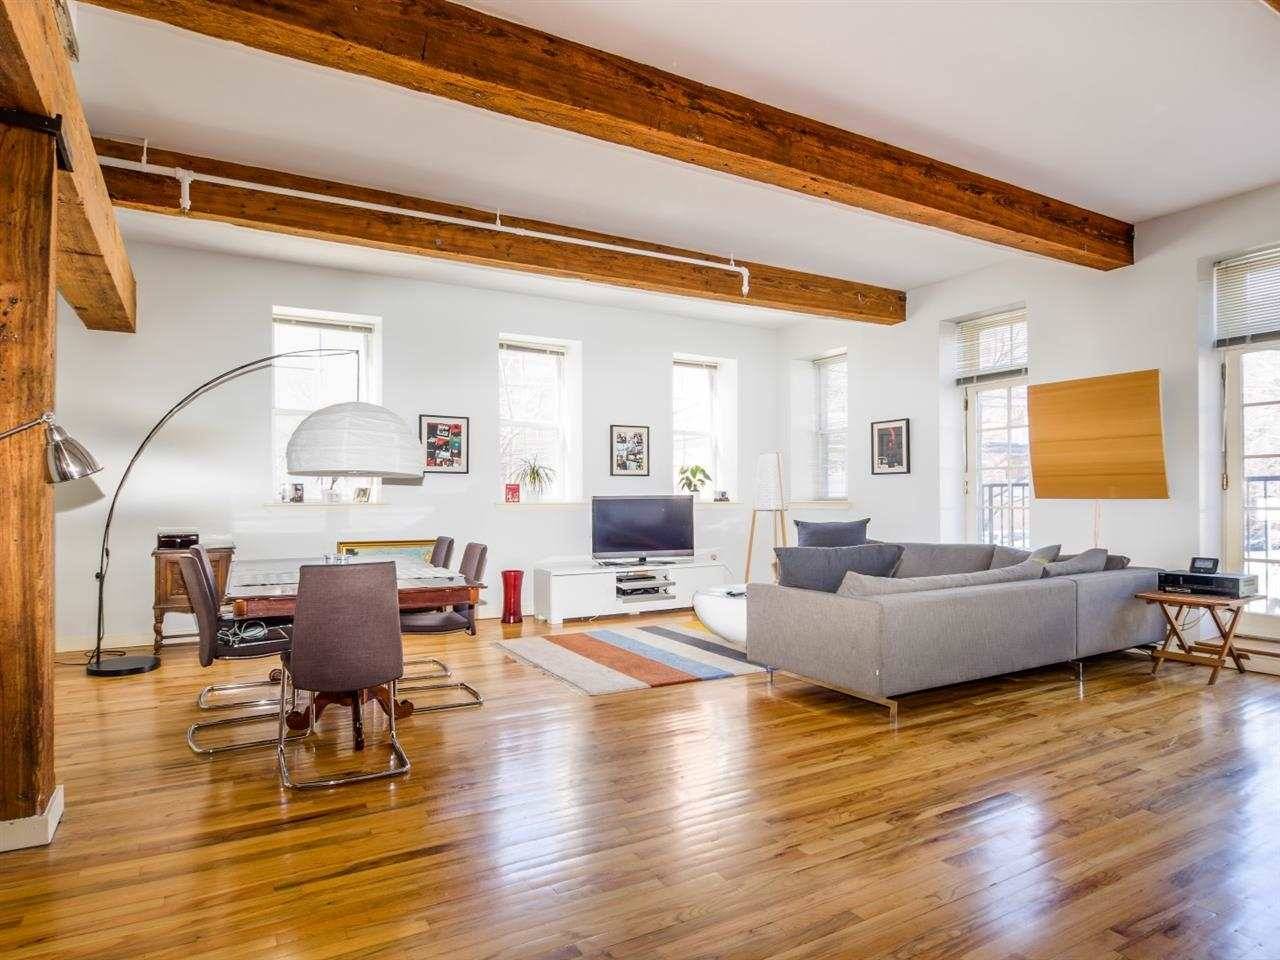 Amazing loft space in this 2br/2ba corner unit with one garage parking space